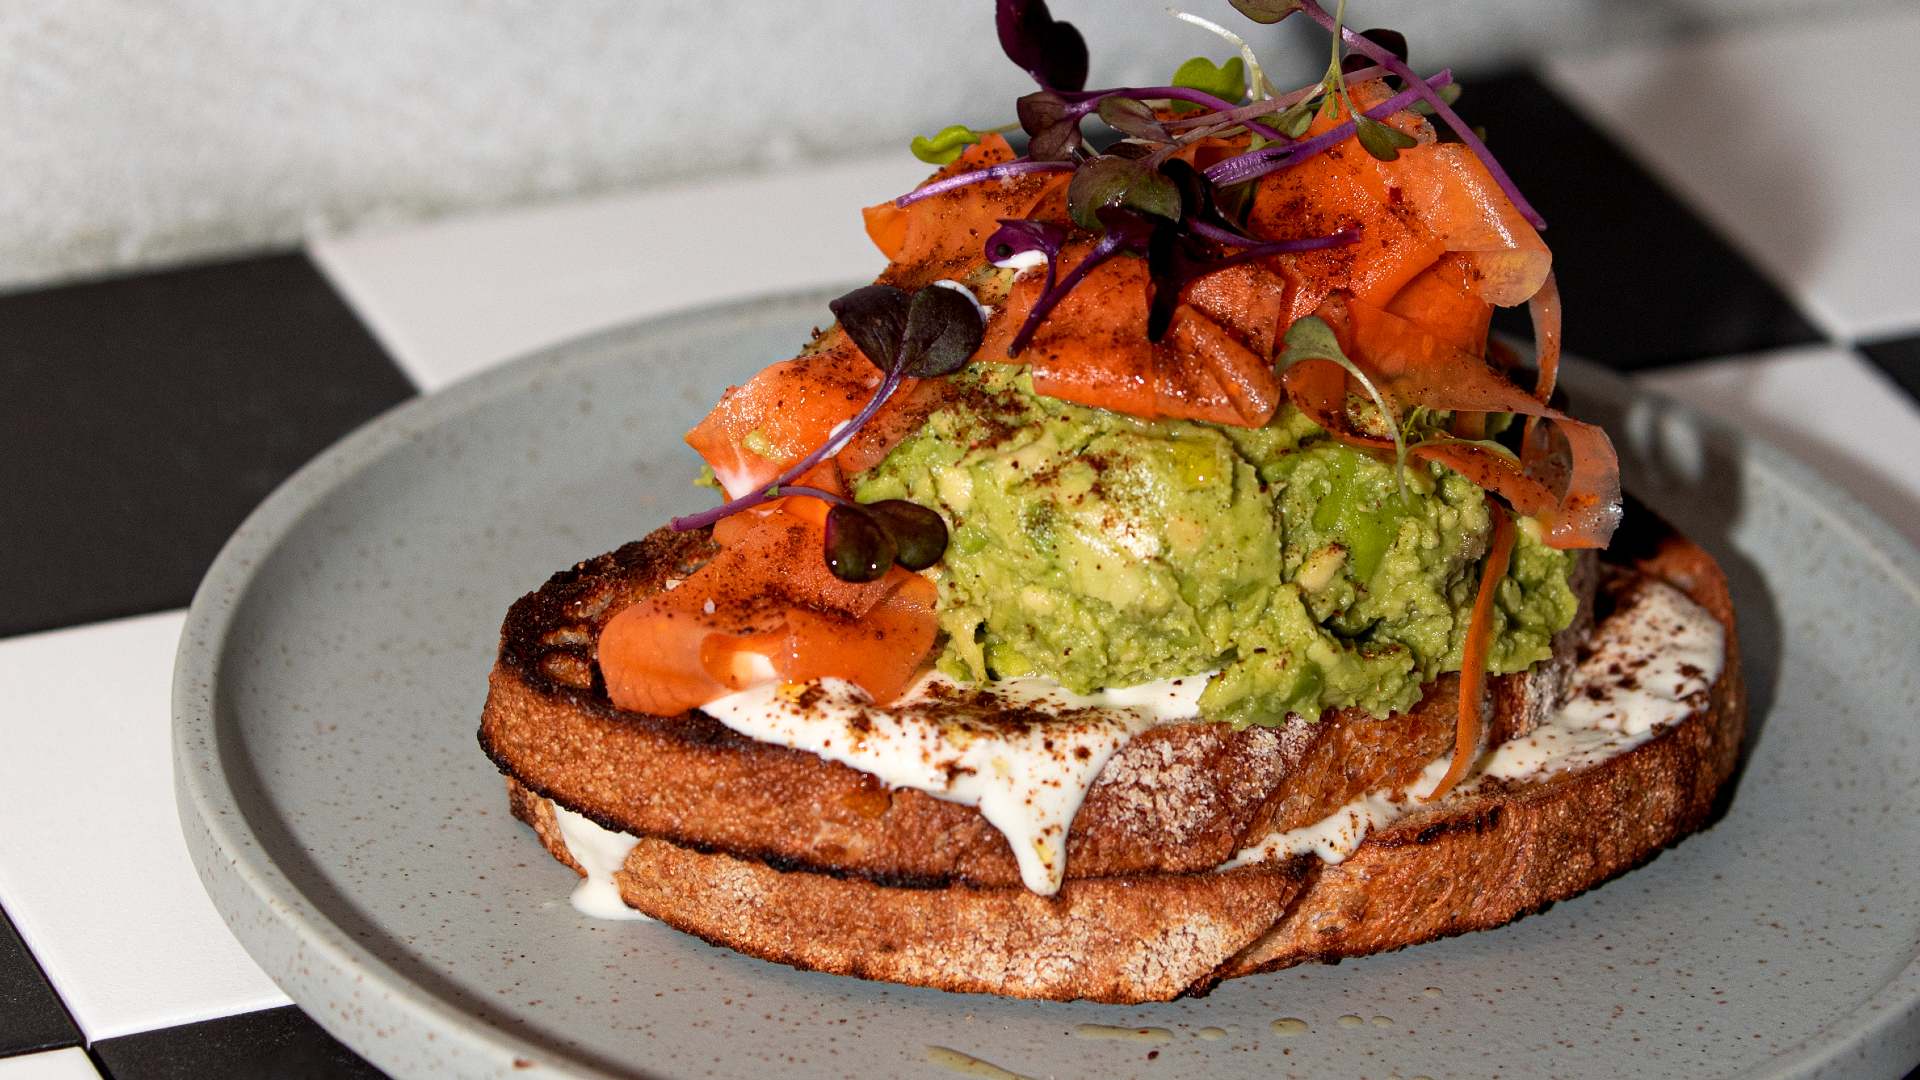 Avocado on toast at Convoy cafe in Moonee Ponds.